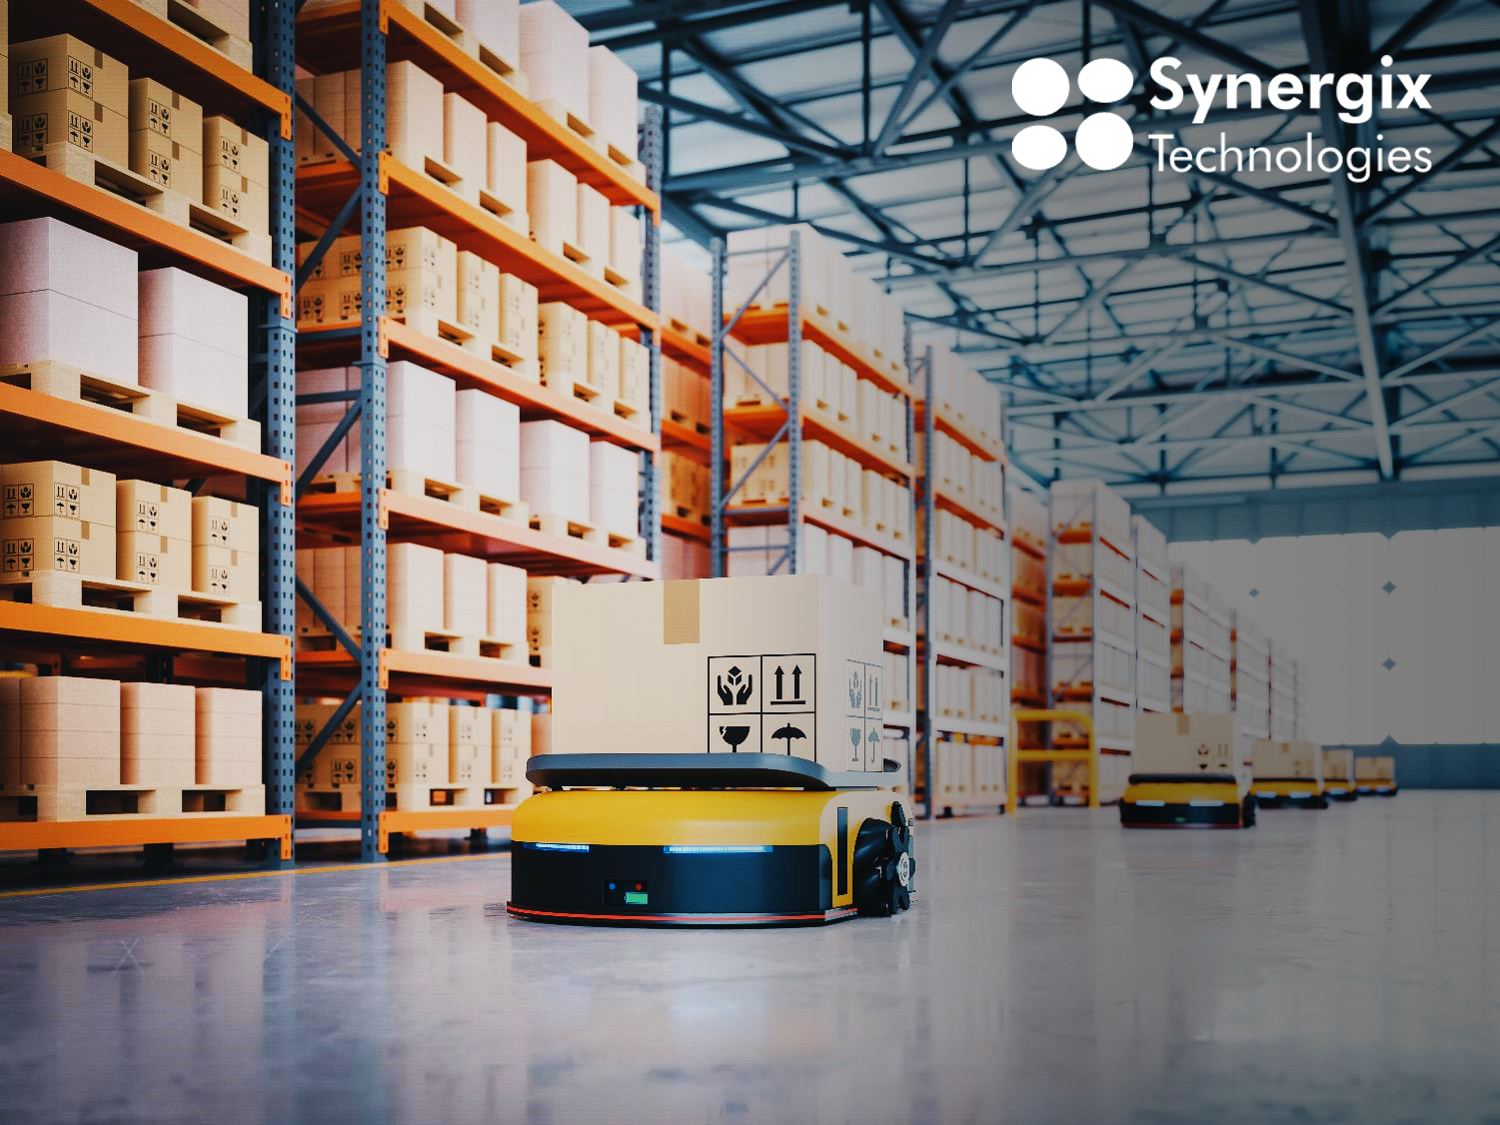 4 Common Inventory Management Issues That Happen in Every Warehouse